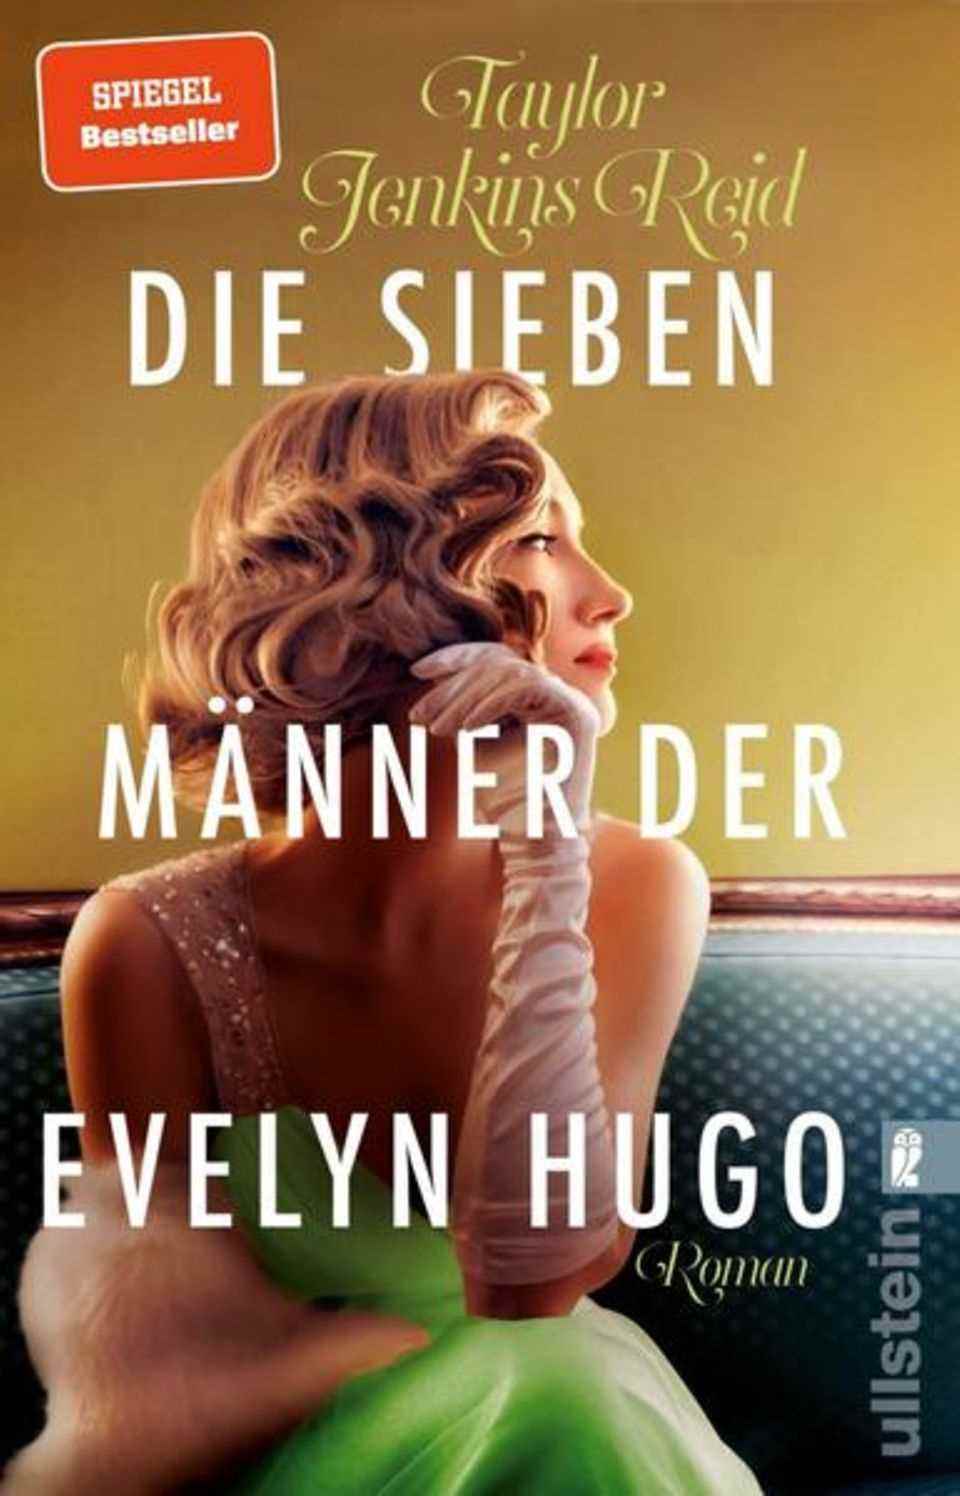 holiday reading: "The seven men of Evelyn Hugo" by Taylor Jenkins Reid